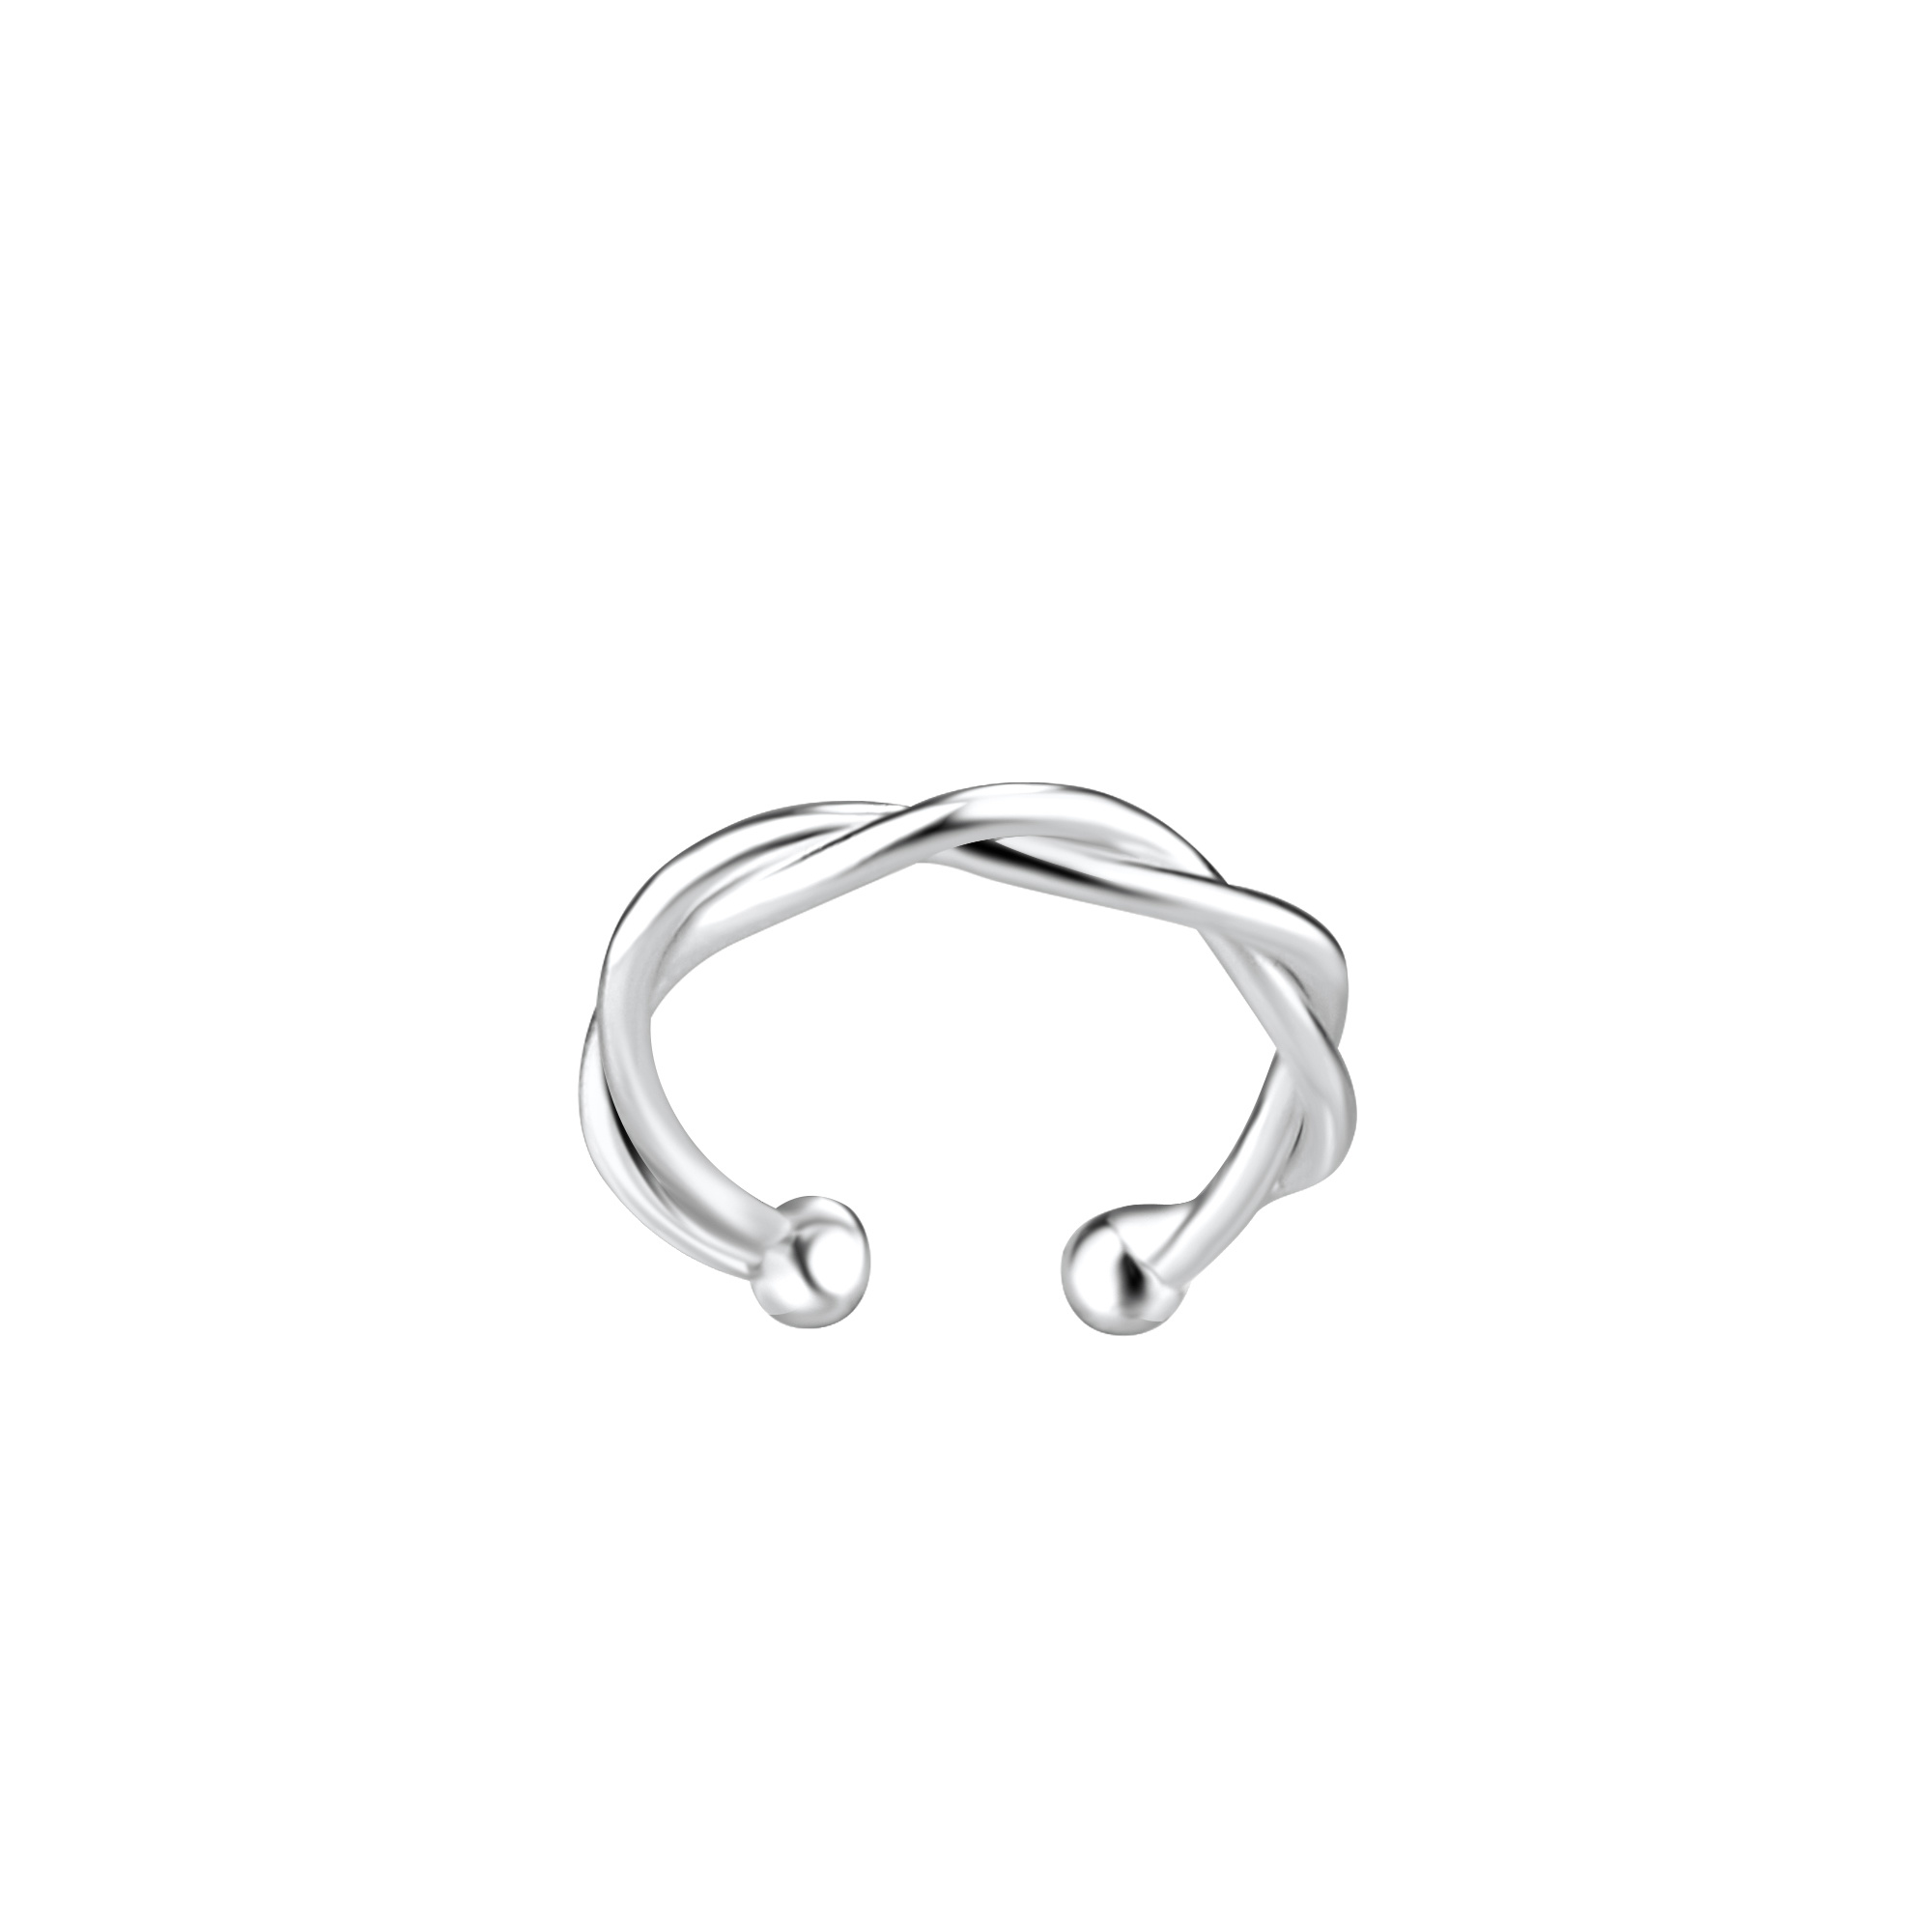 Small braided ear clips - 925 sterling silver-1